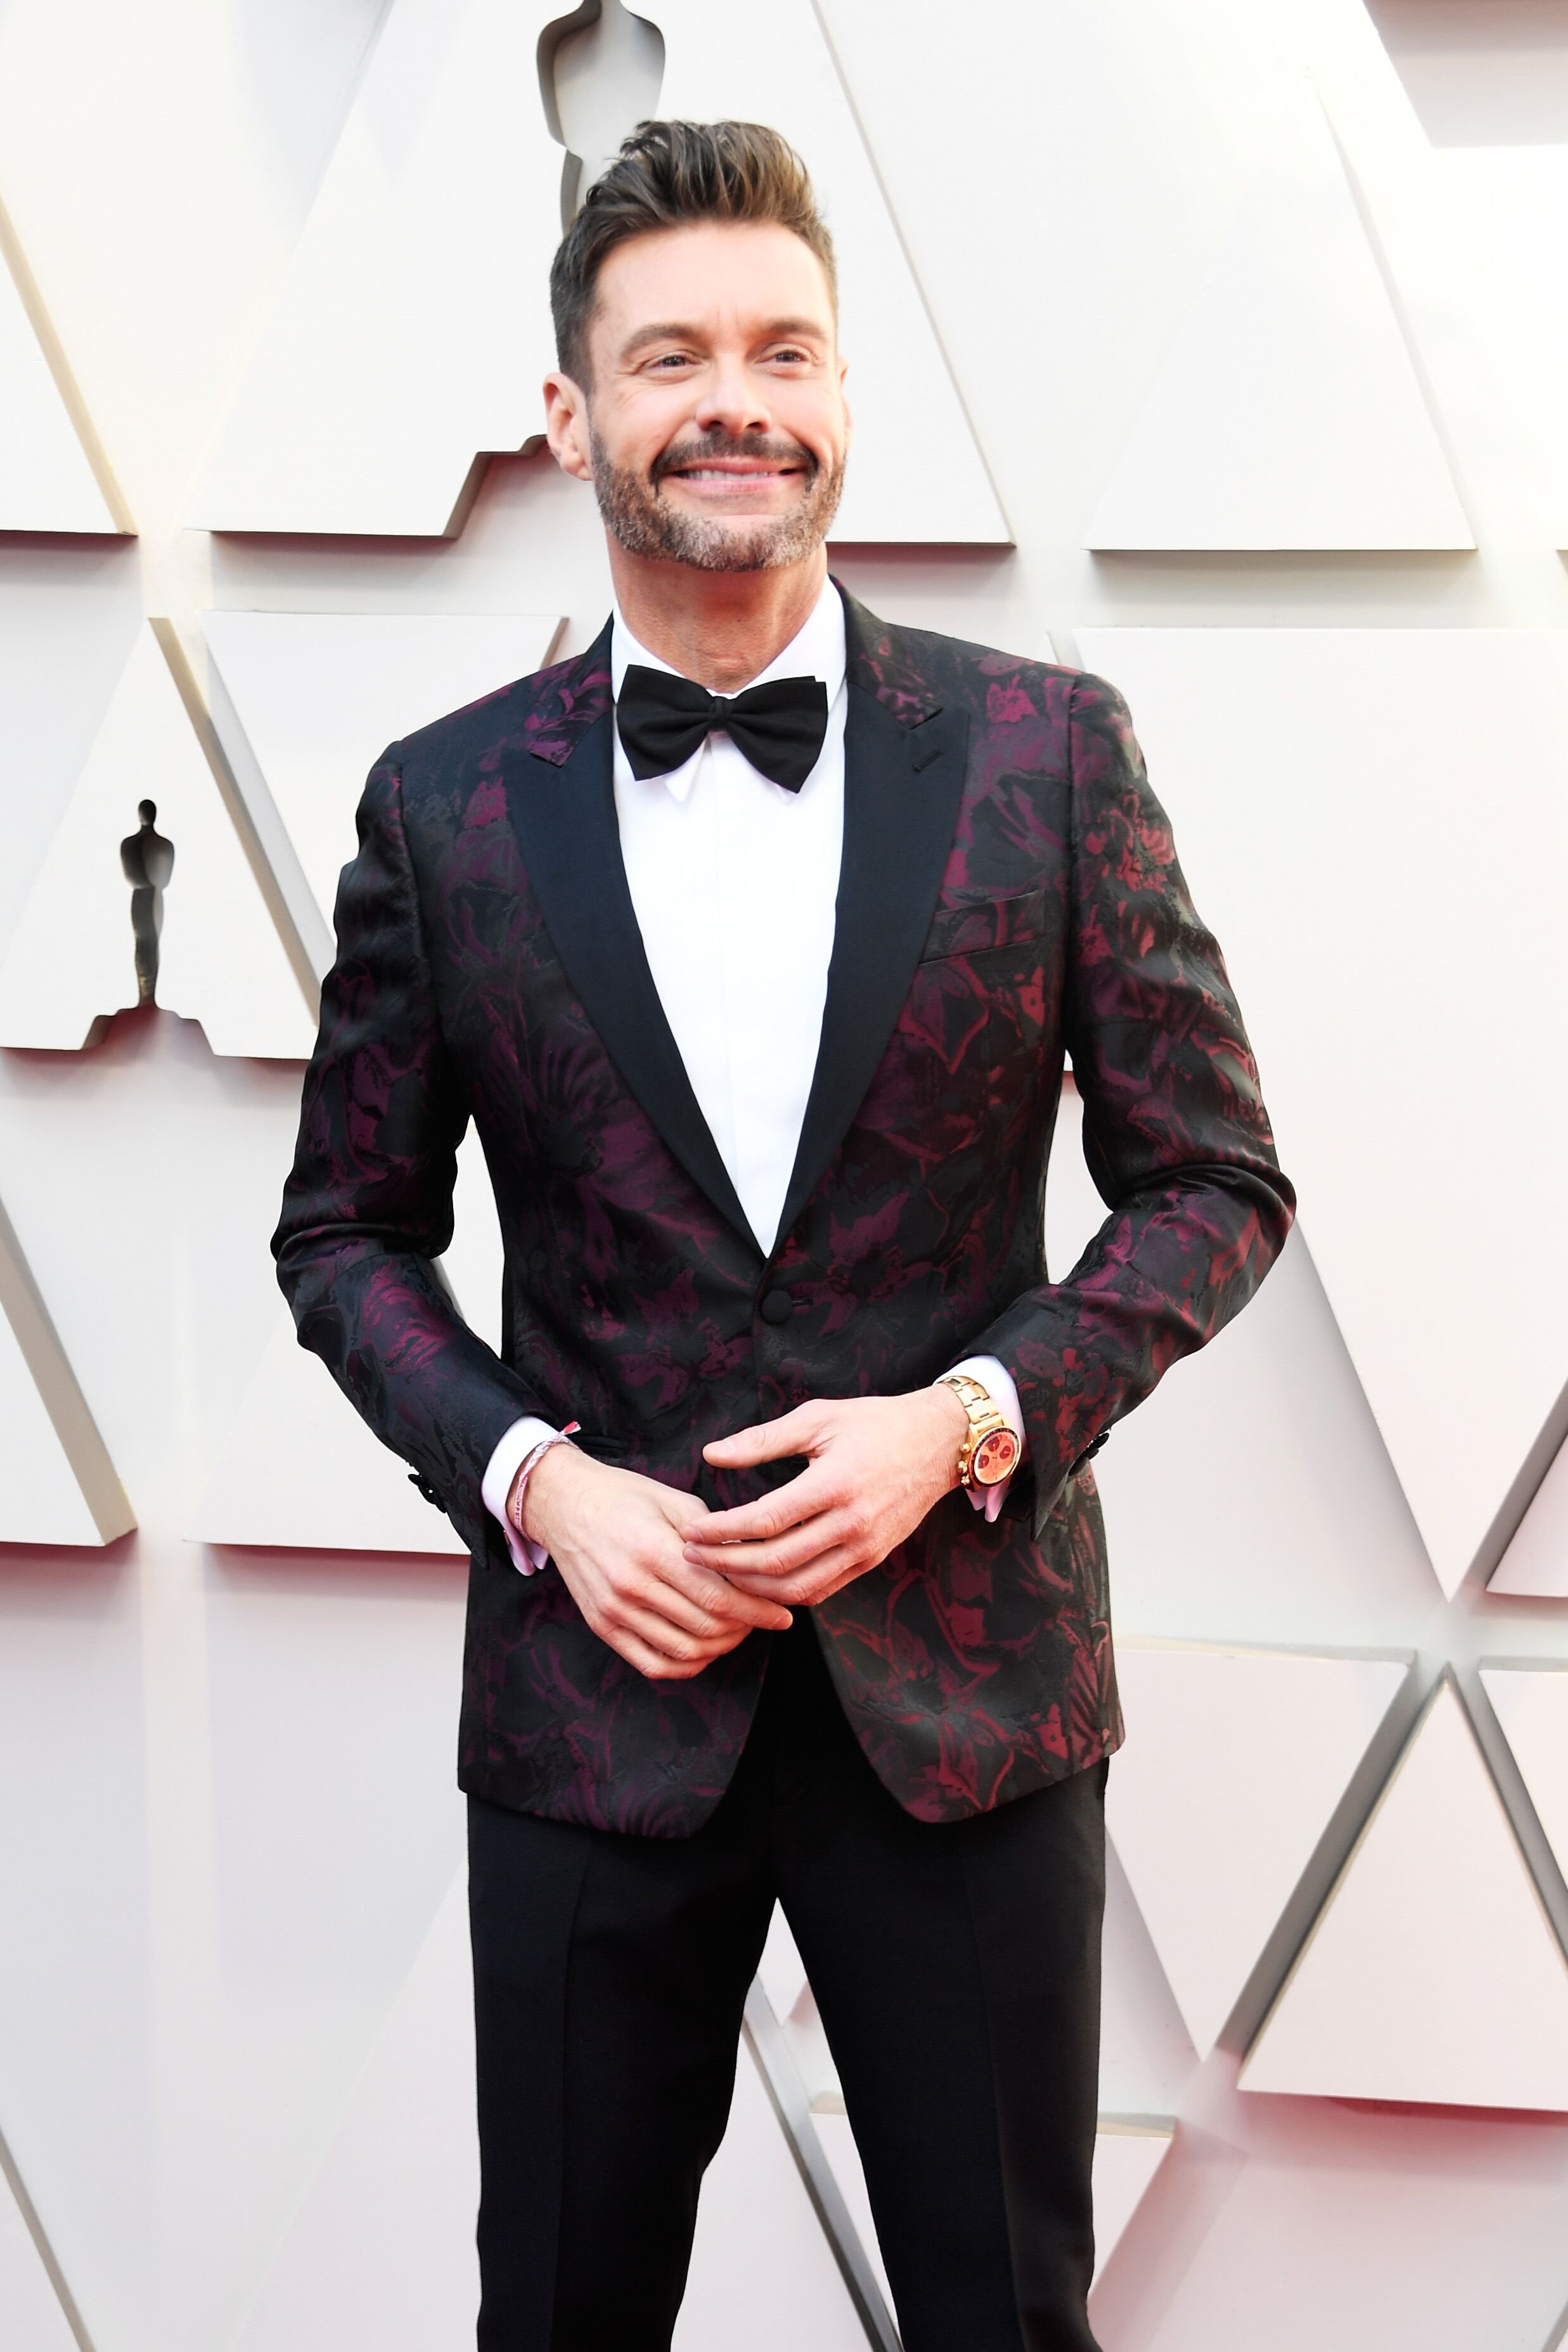 Ryan Seacrest at the 91st Annual Academy Awards | Photo: Getty Images